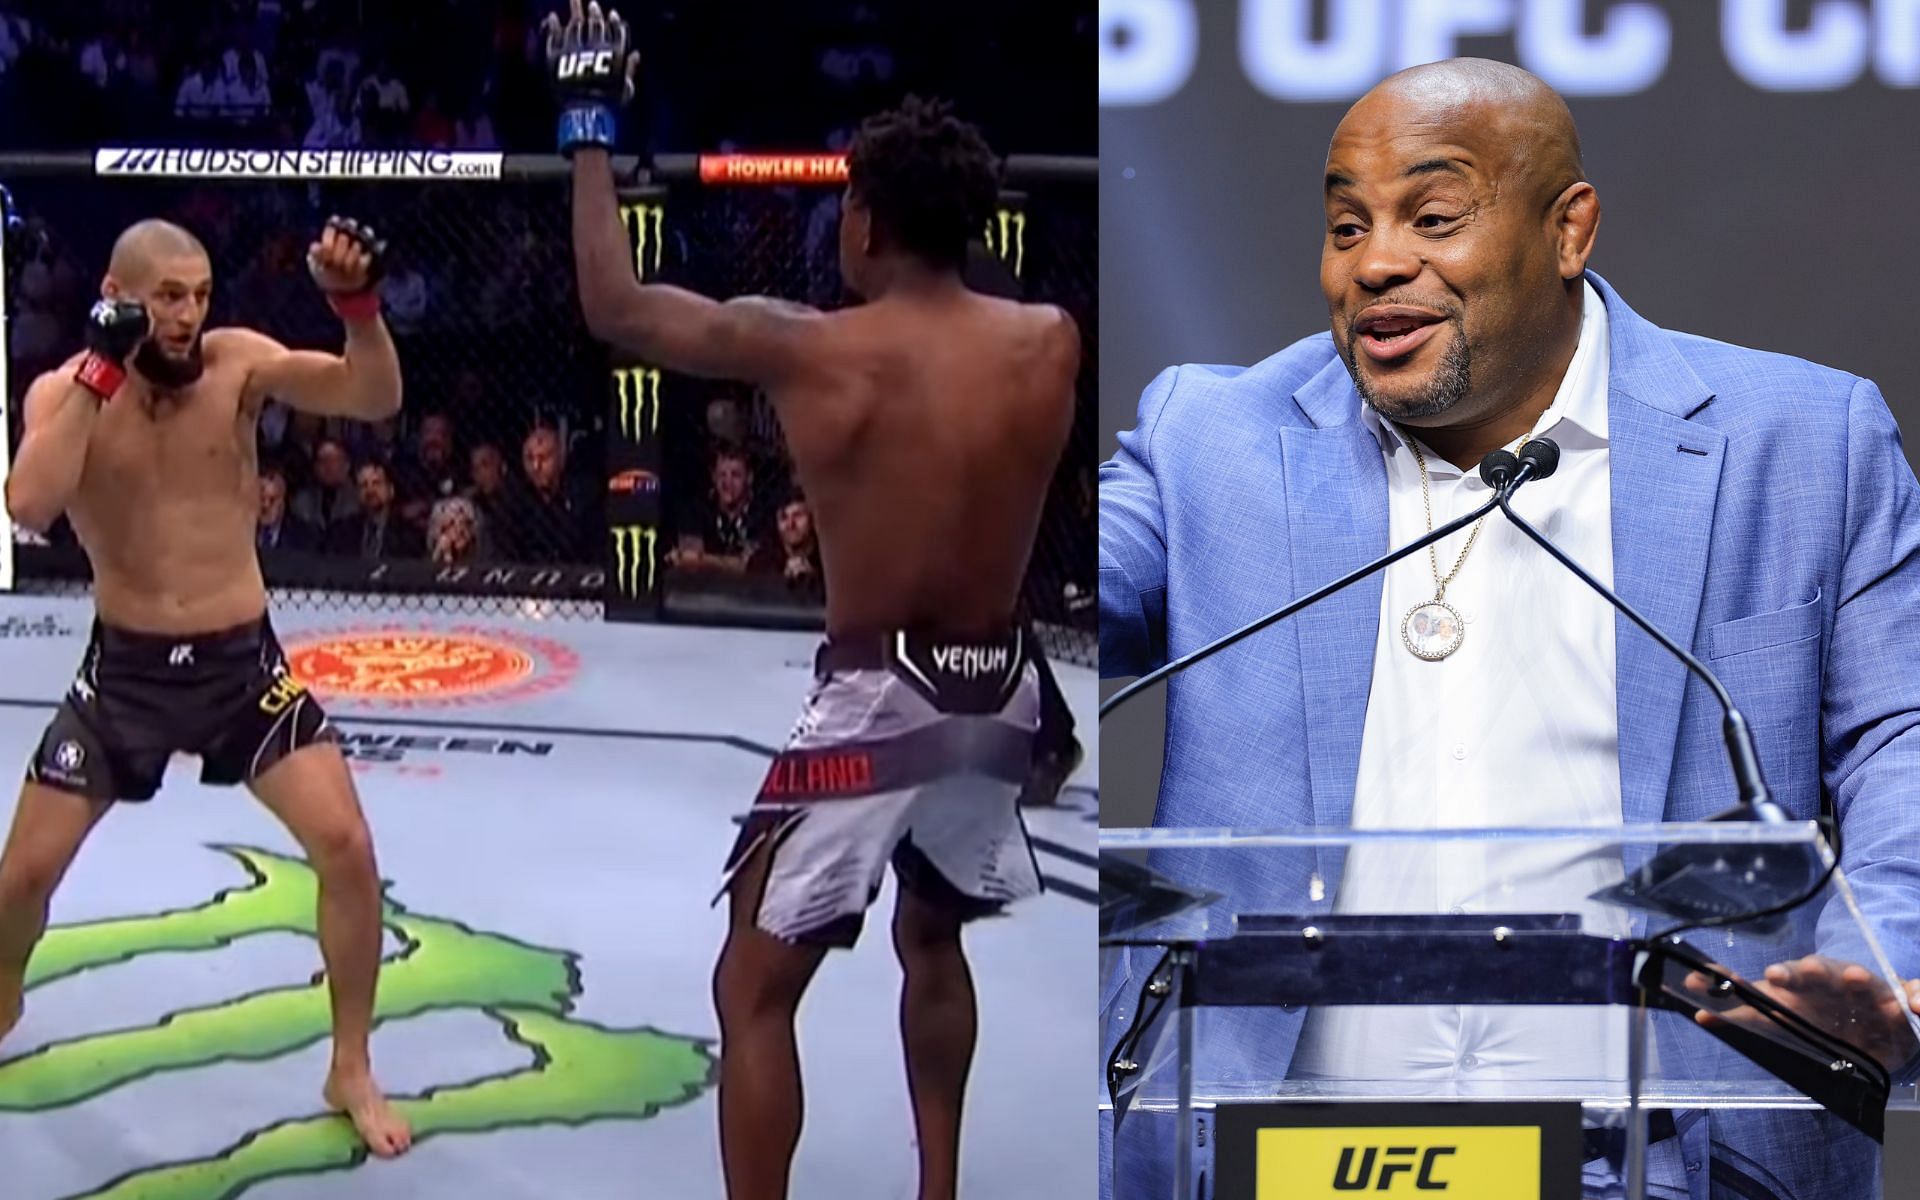 Chimaev vs. Holland (Left), Daniel Cormier (Right) [Image courtesy: MMA World YouTube channel via UFC and Getty Images]